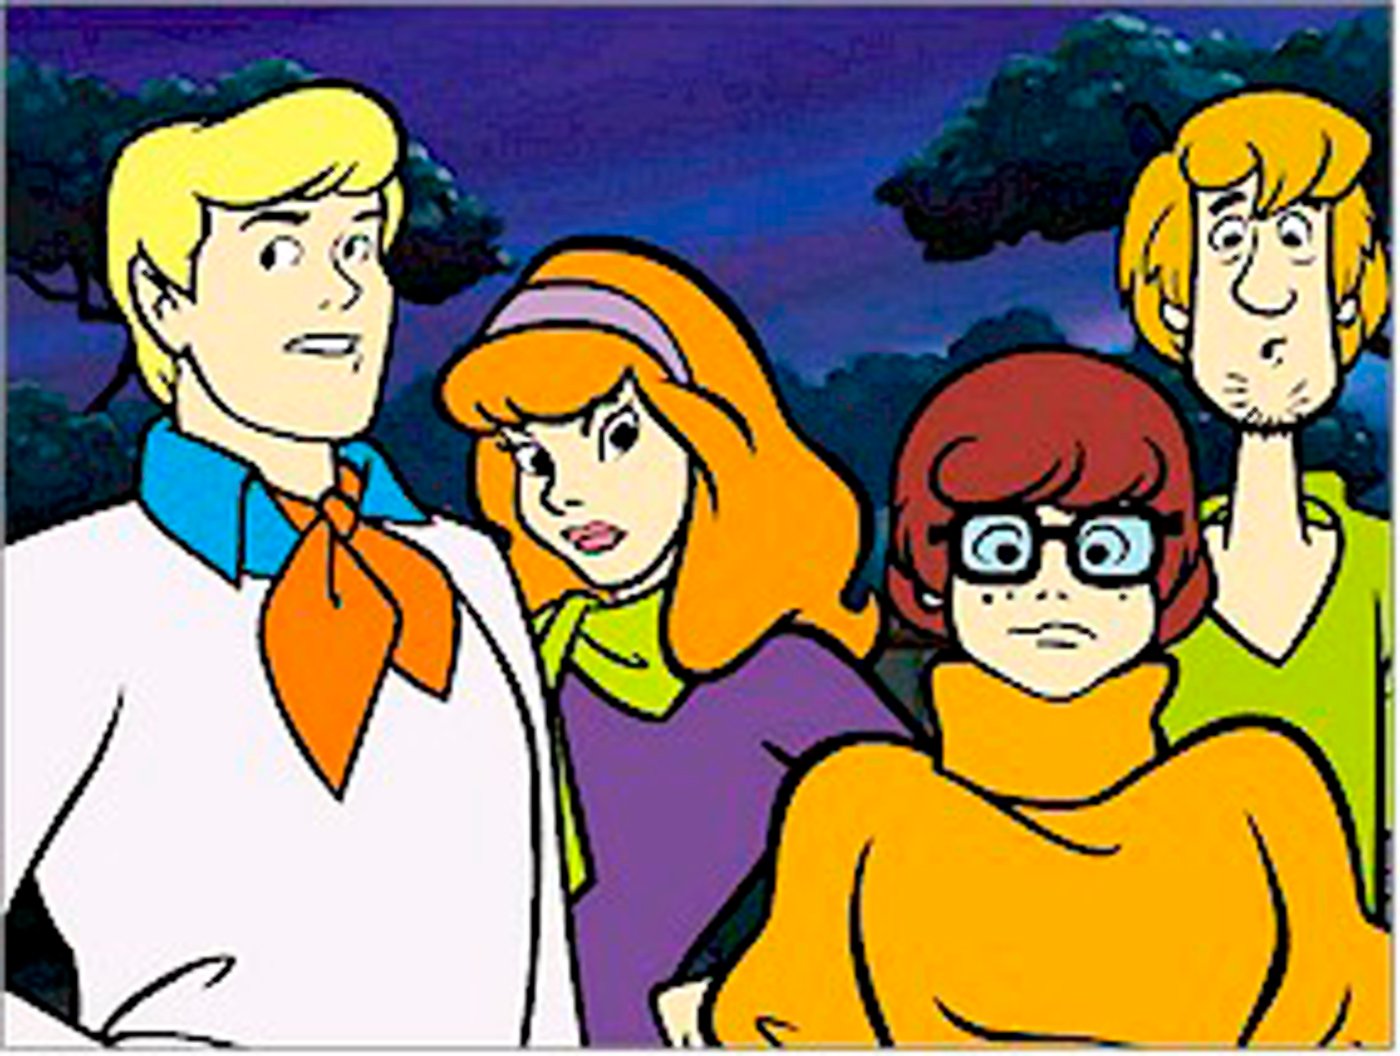 Shaggy Scooby Doo Daphne Velma Fred What S New Scooby Doo 2002 Hot Sex Picture 